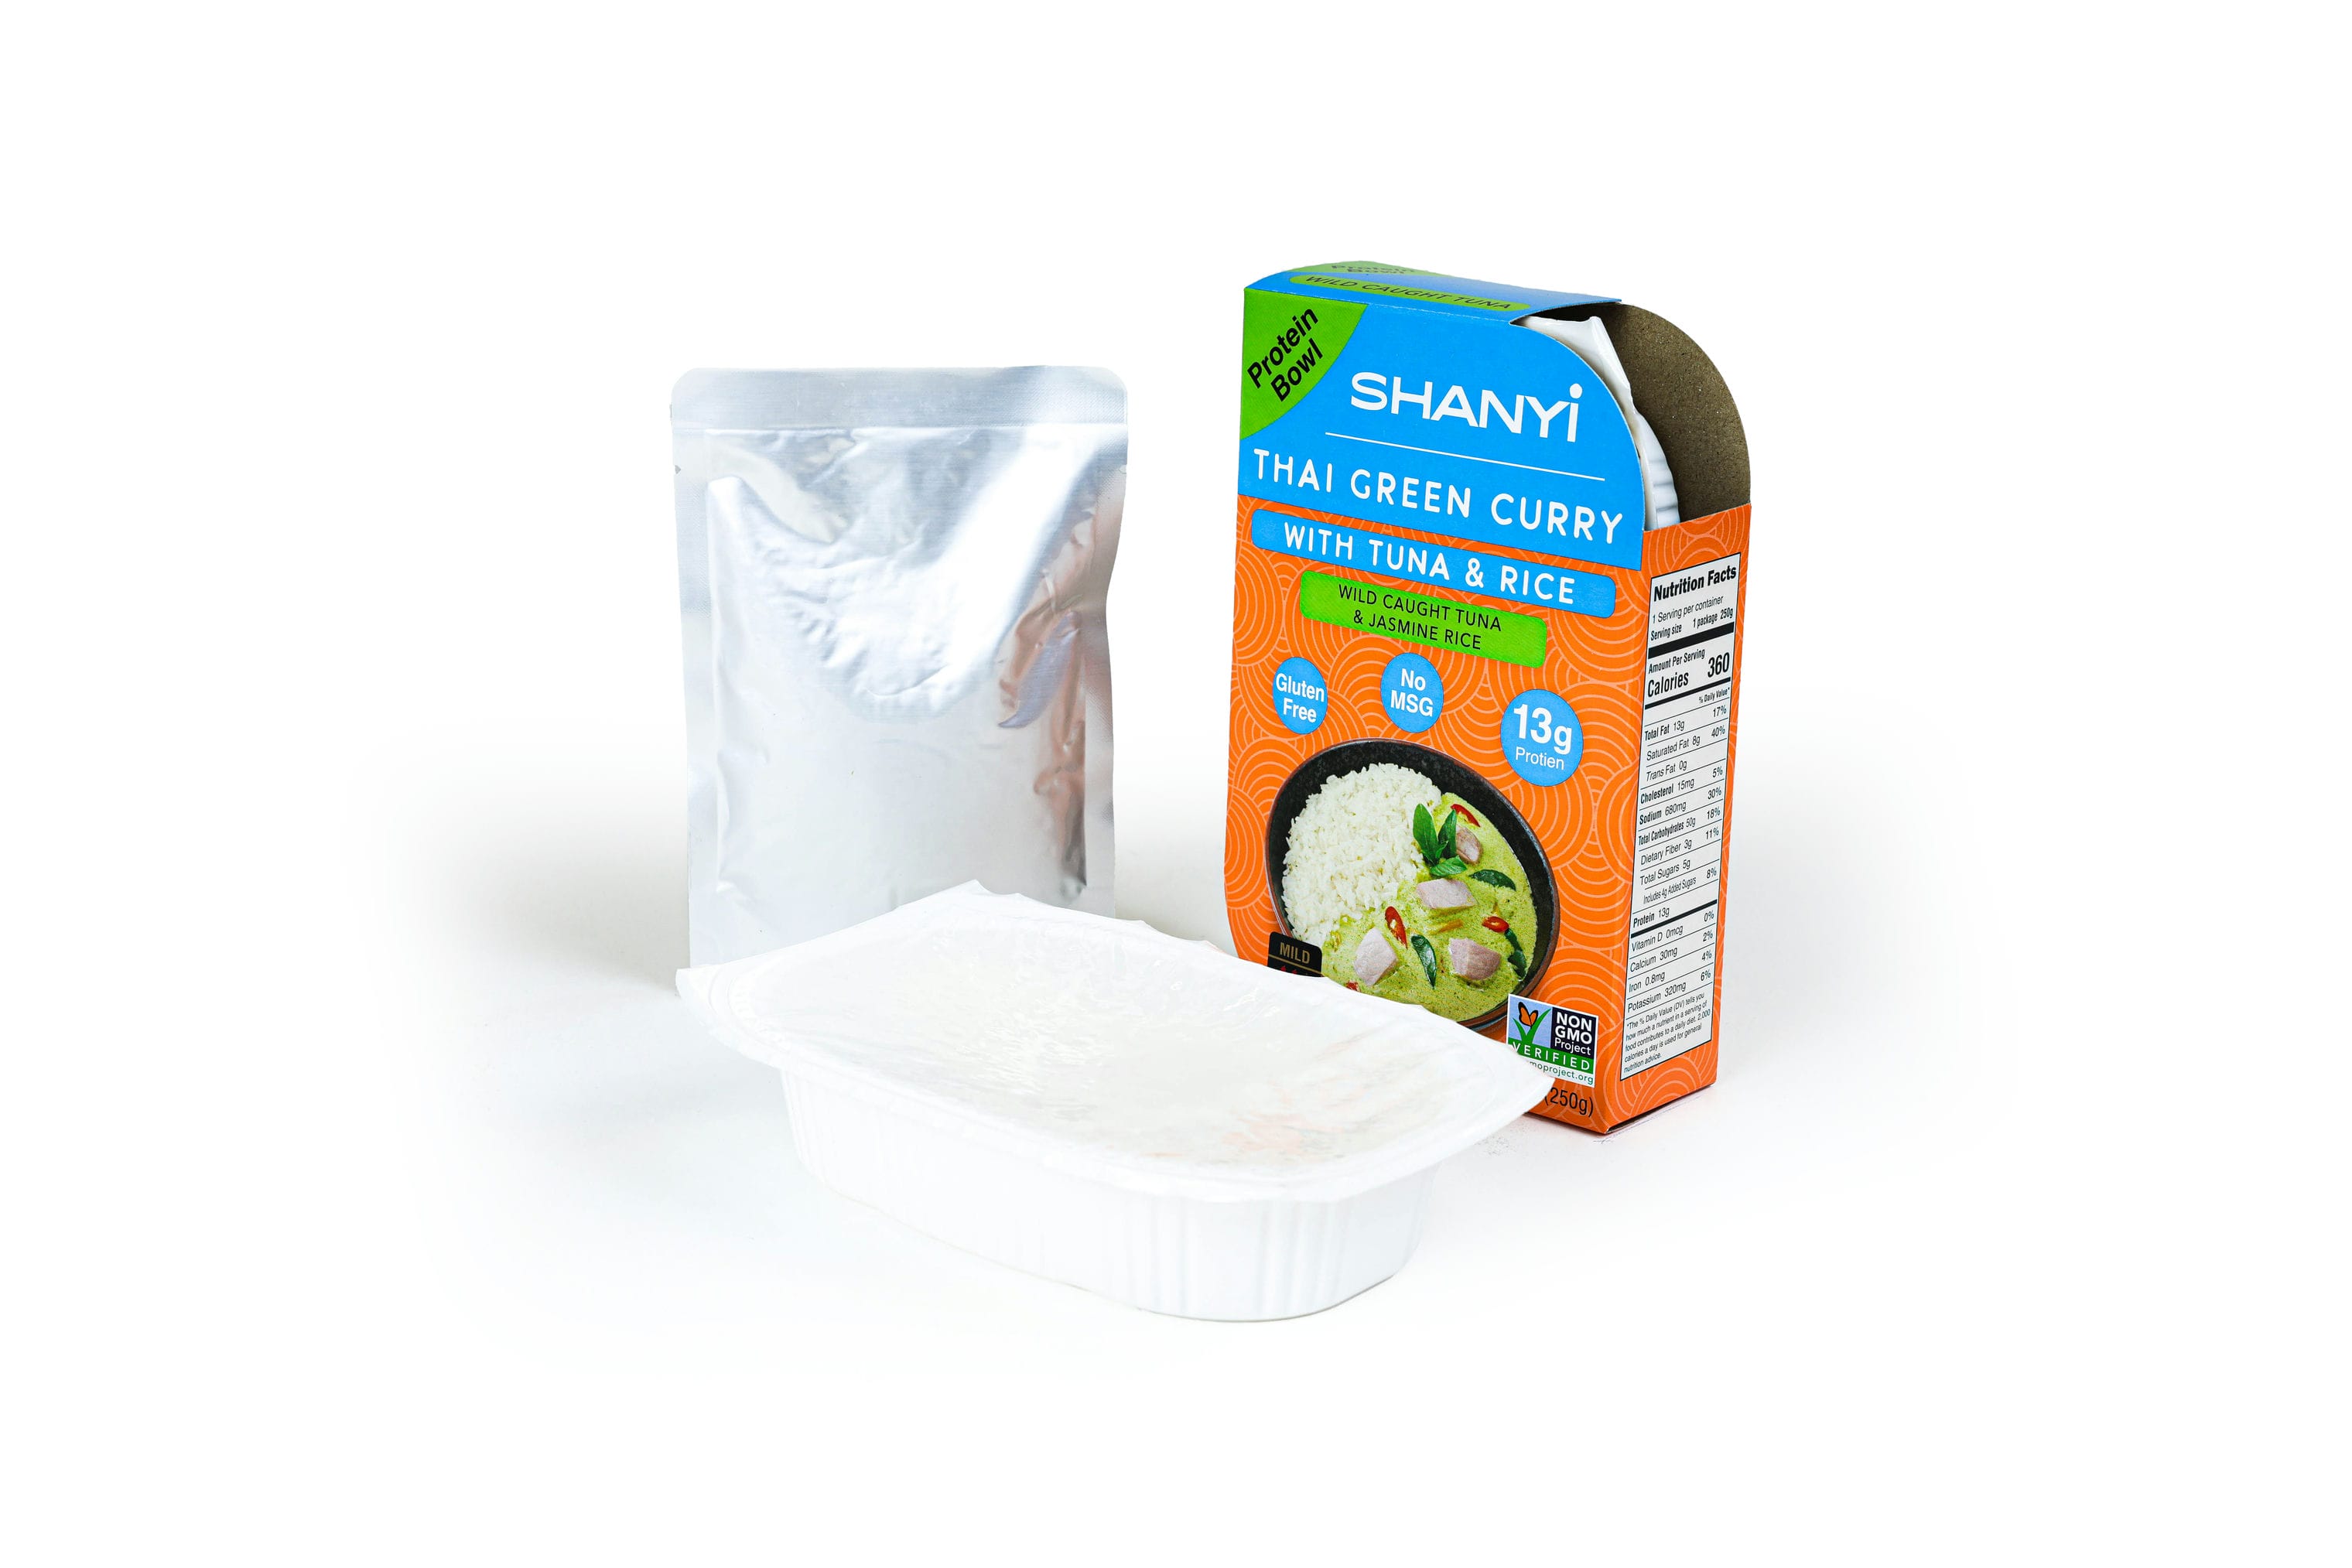 ShanYi Instant Microwave Meals Ready to Eat, 250g/8.8oz, Thai Green Curry with Tuna and Jasmine Rice, Case of 6